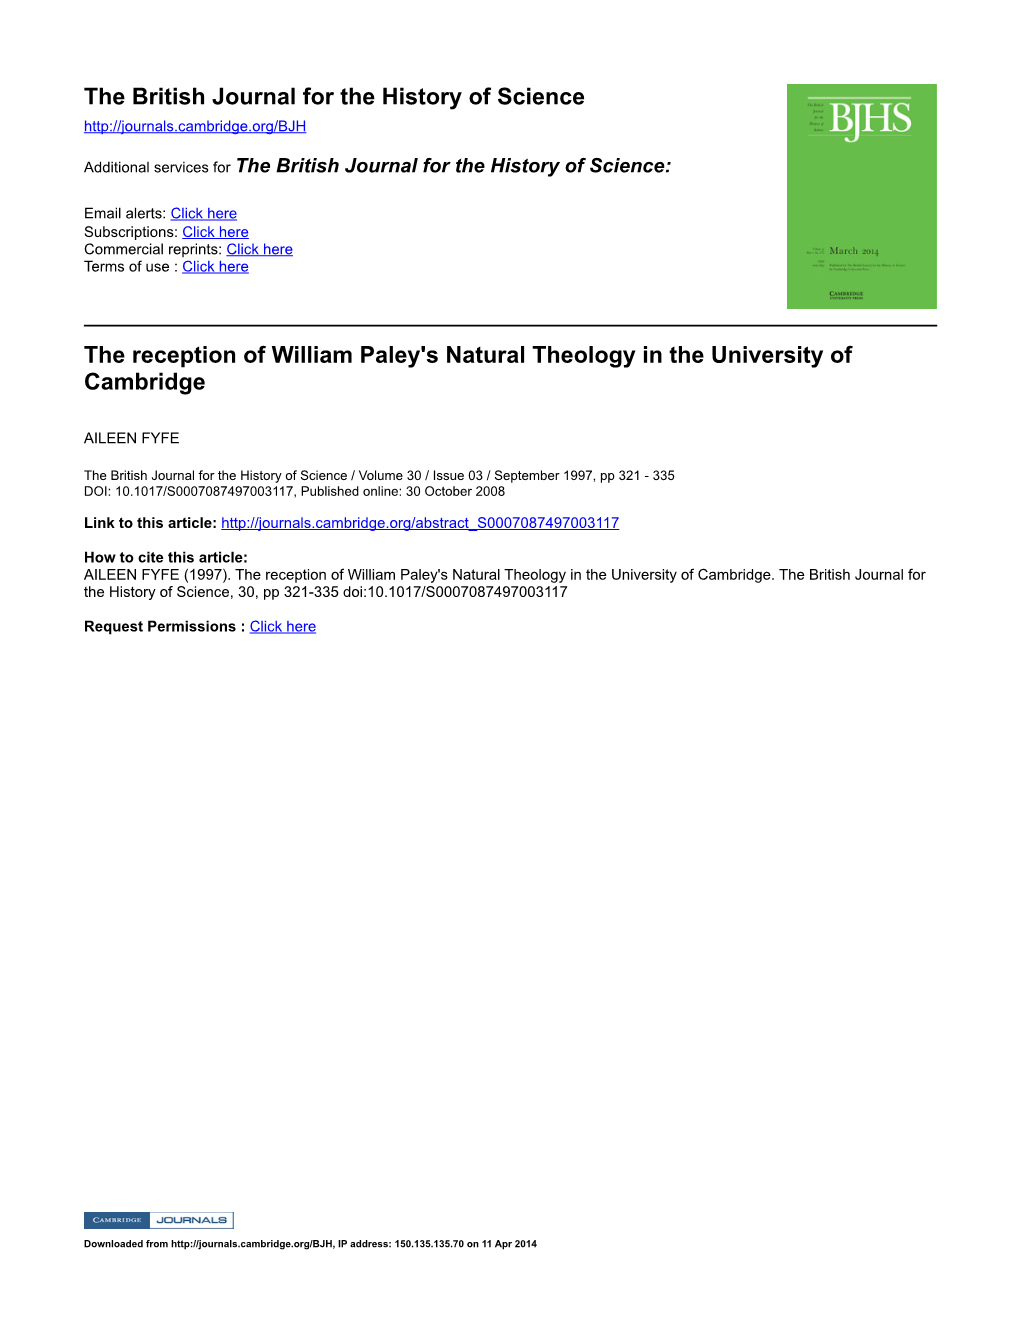 The Reception of William Paley's Natural Theology in the University of Cambridge